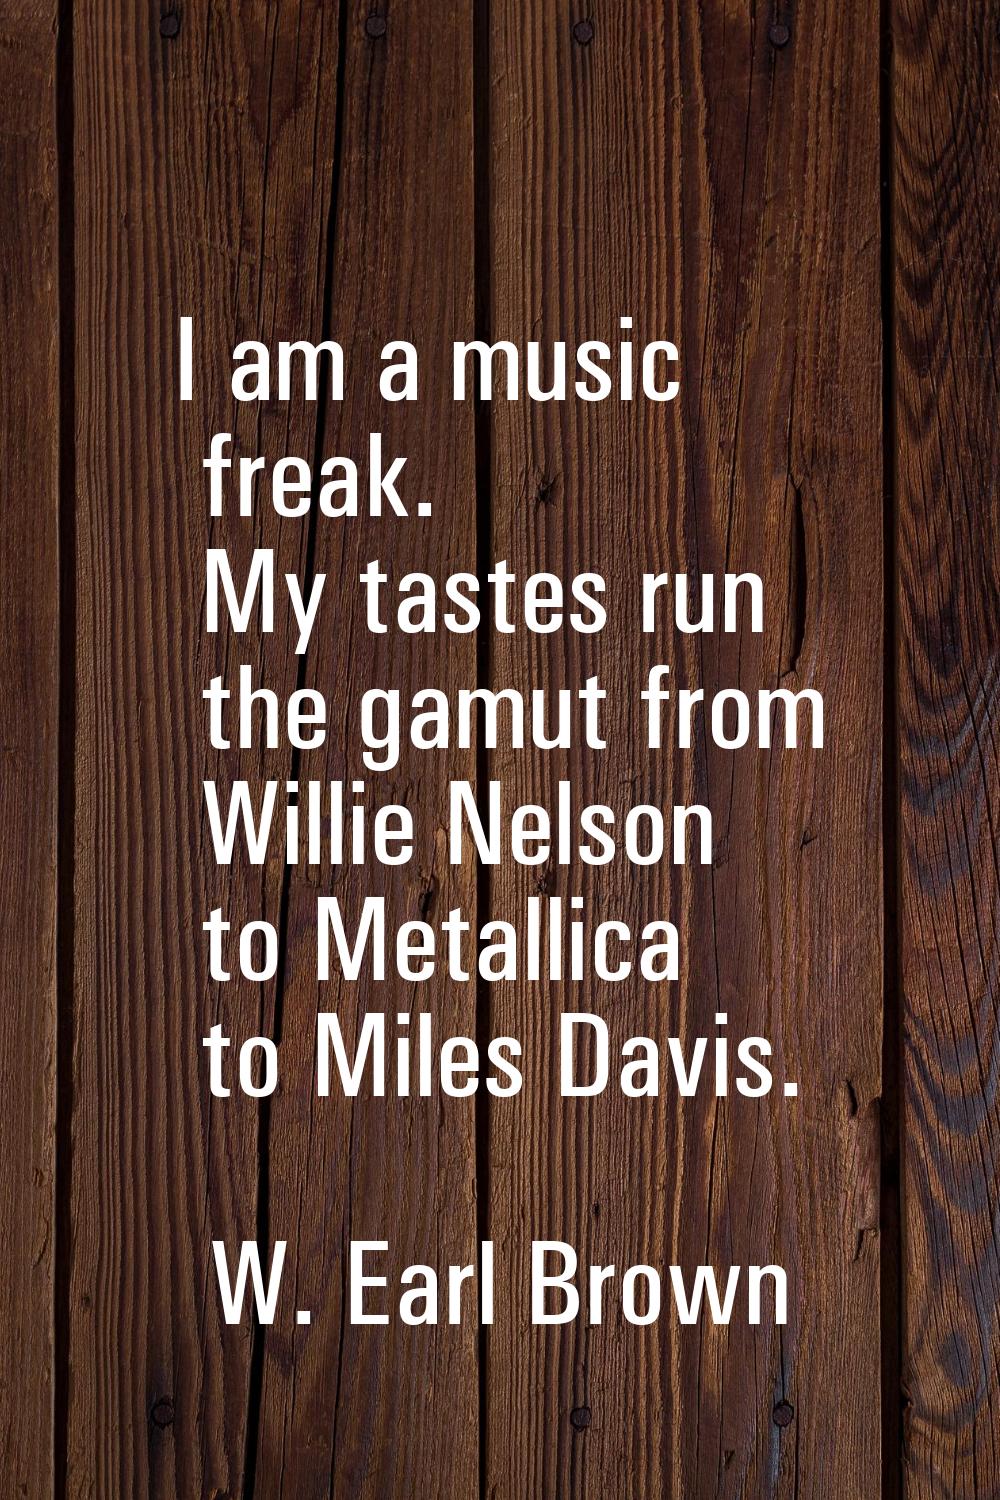 I am a music freak. My tastes run the gamut from Willie Nelson to Metallica to Miles Davis.